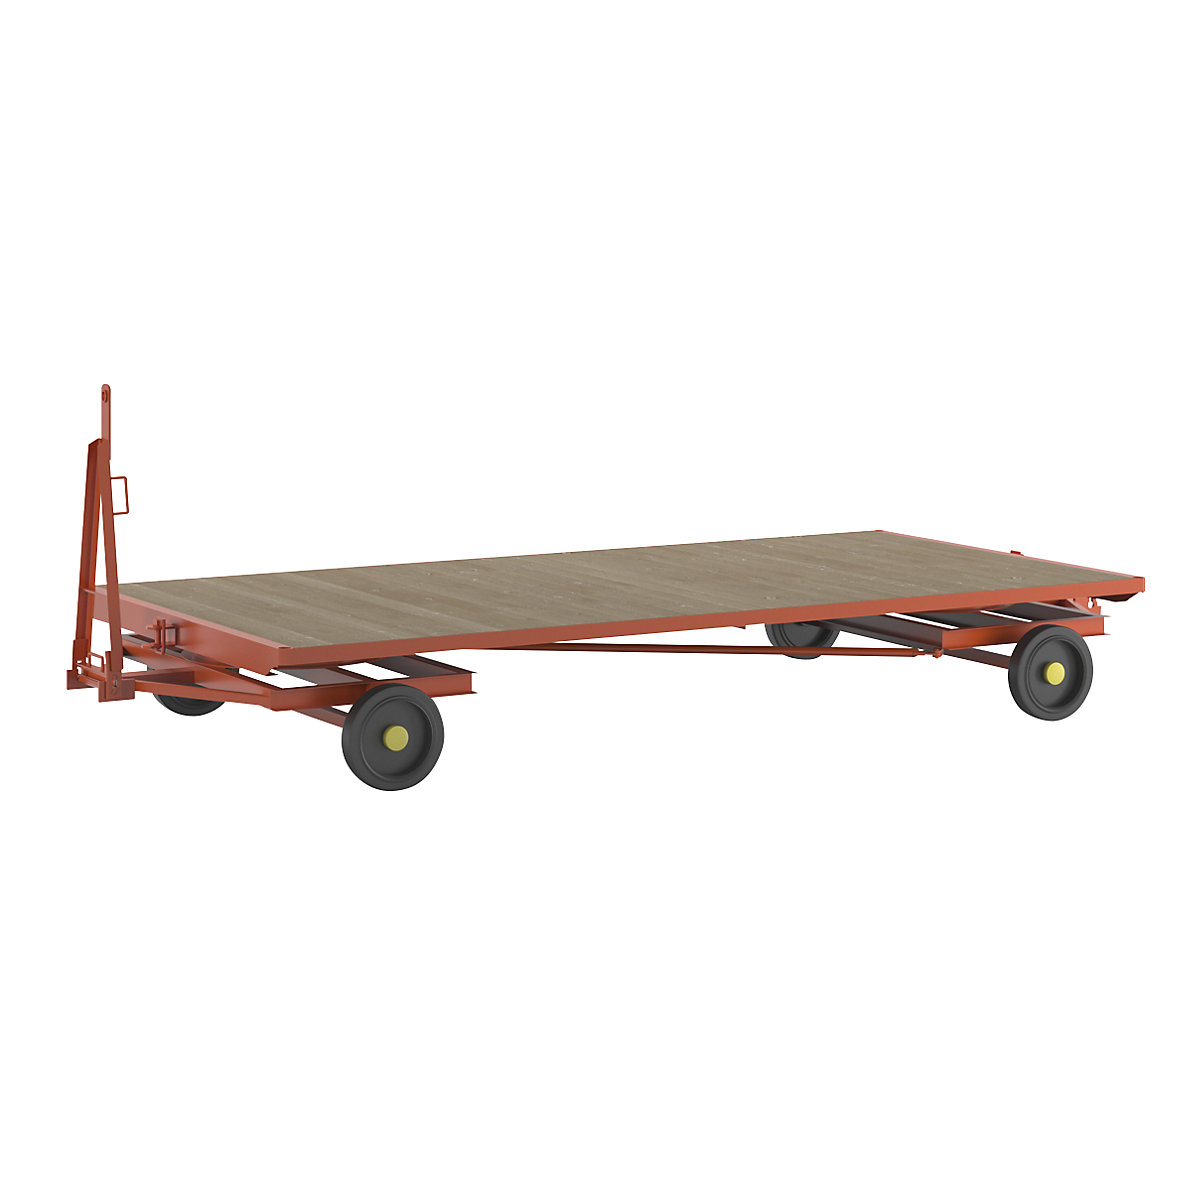 Trailer, 4-wheel double turntable steering, max. load 3 t, platform 4.0 x 2.0 m, solid rubber tyres-12